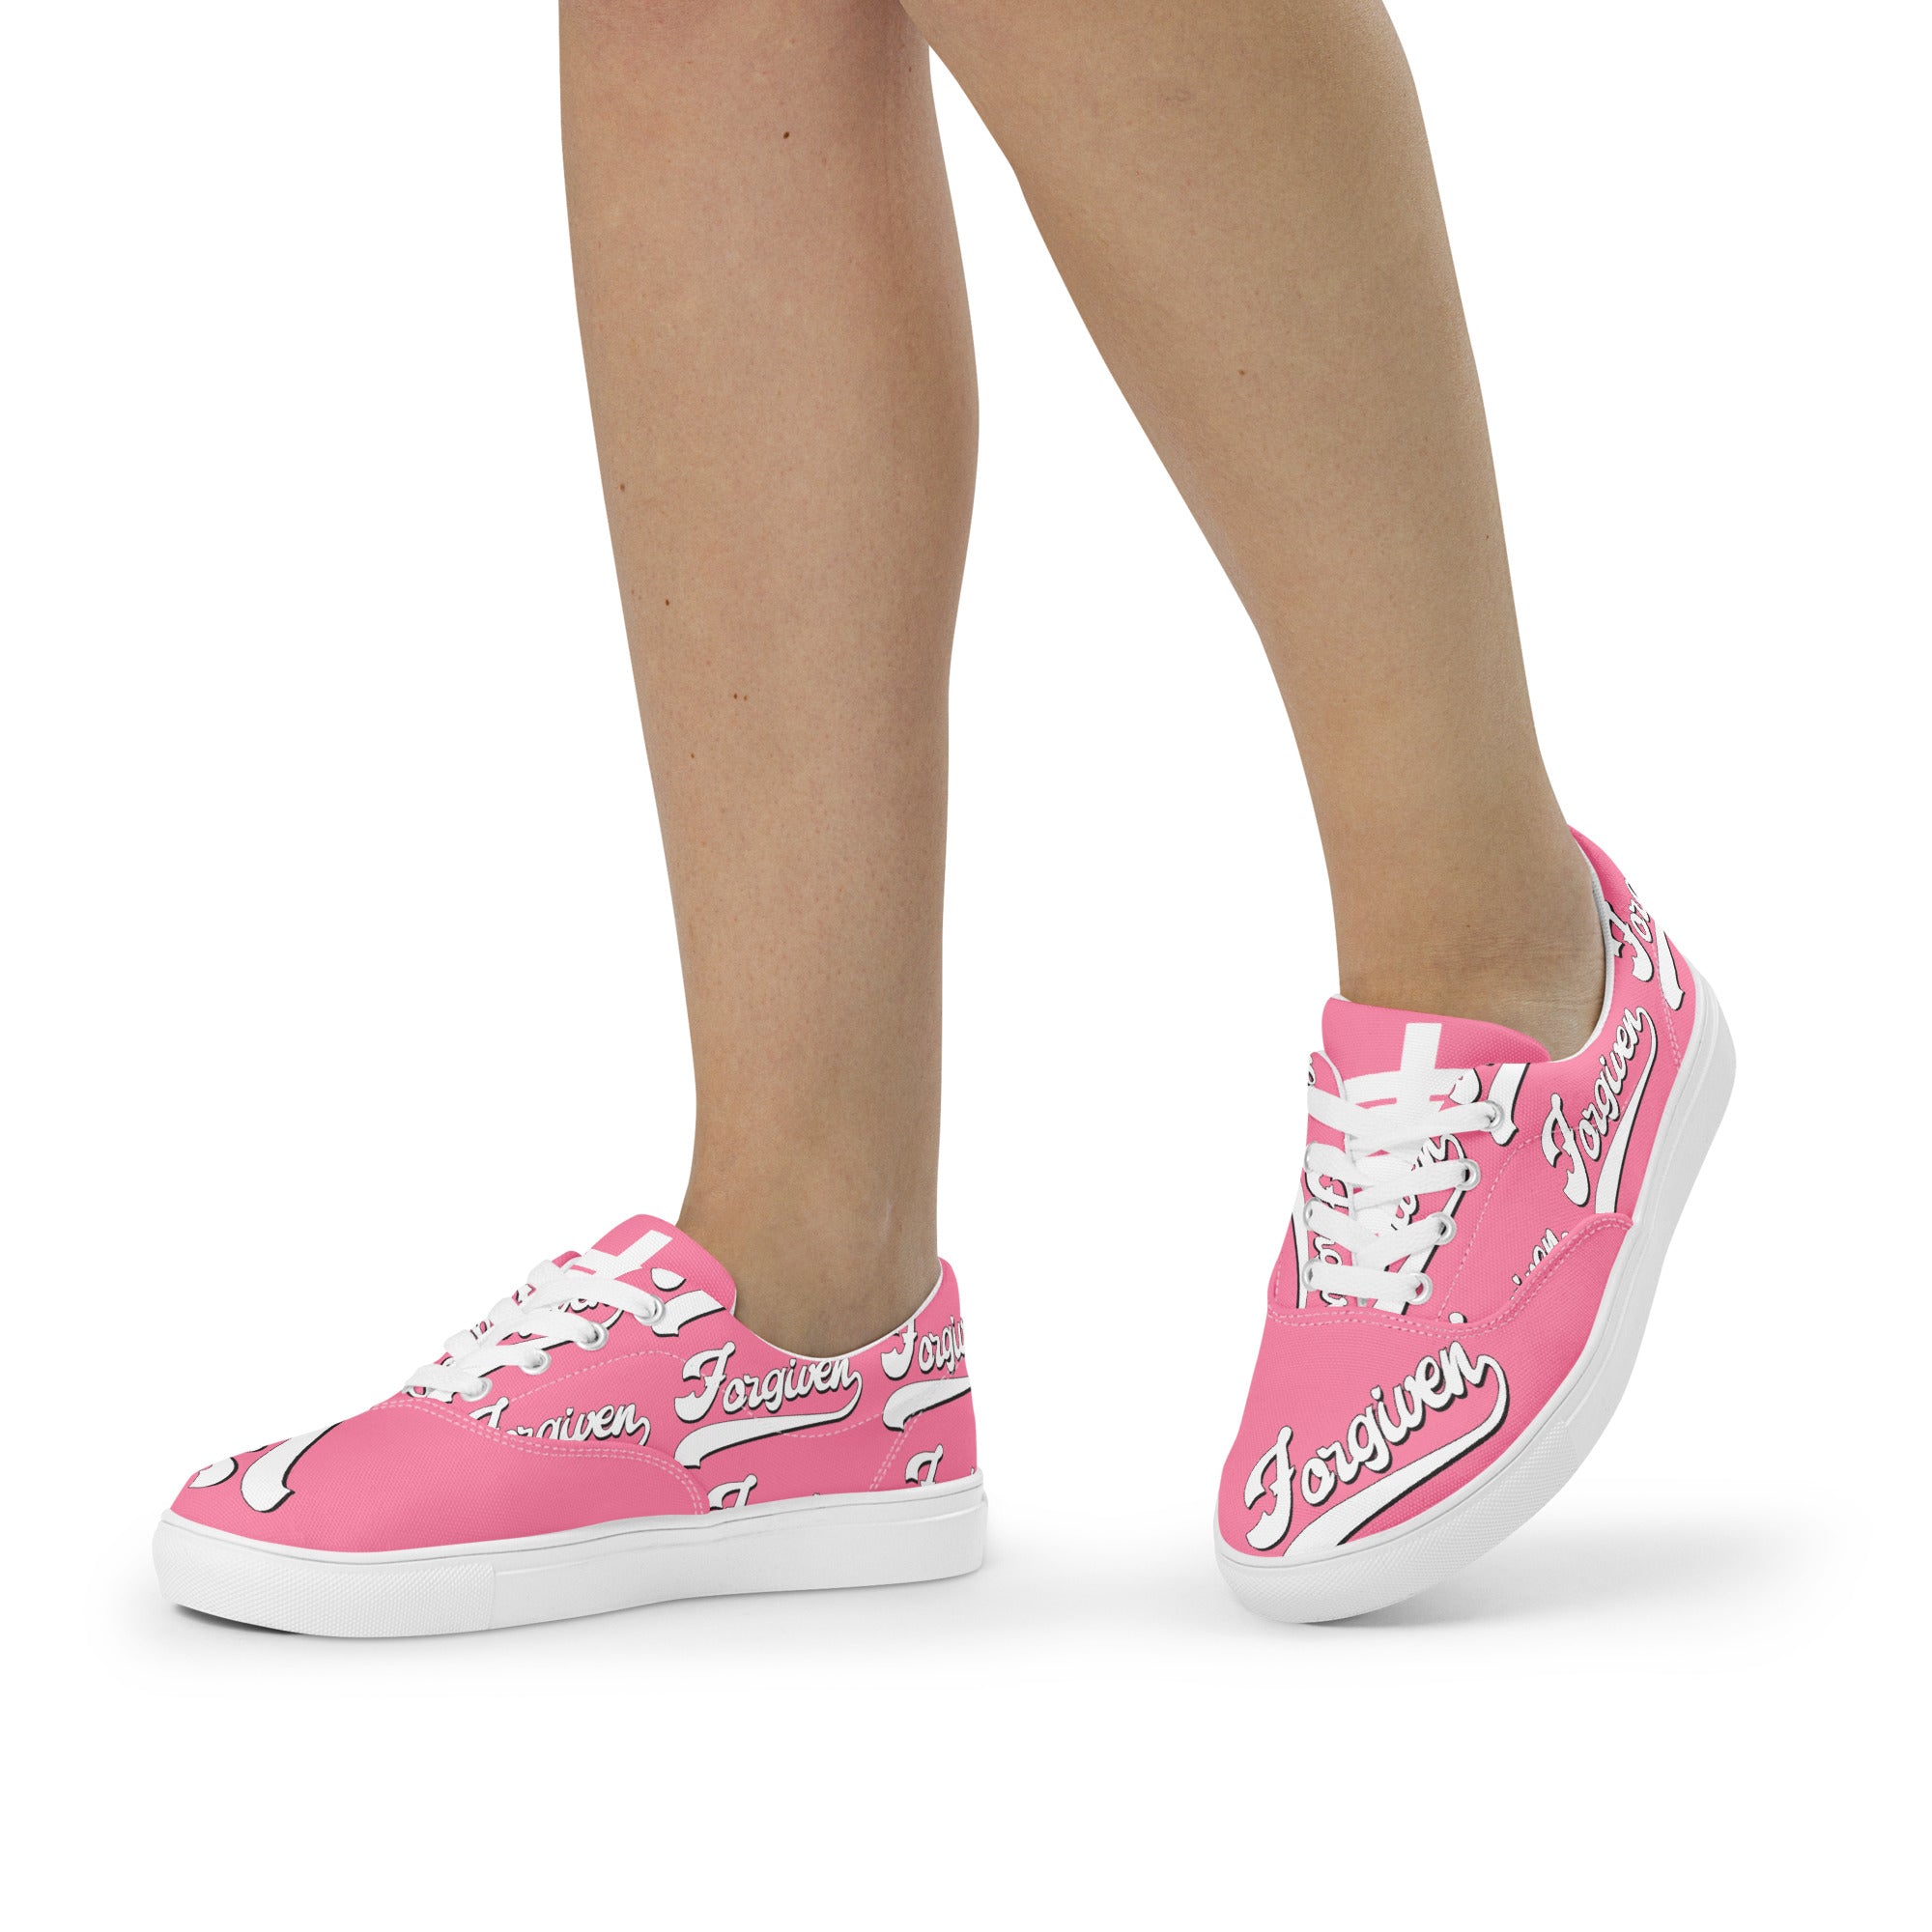 Women’s Forgiven Lace-Up Shoes (Pink)